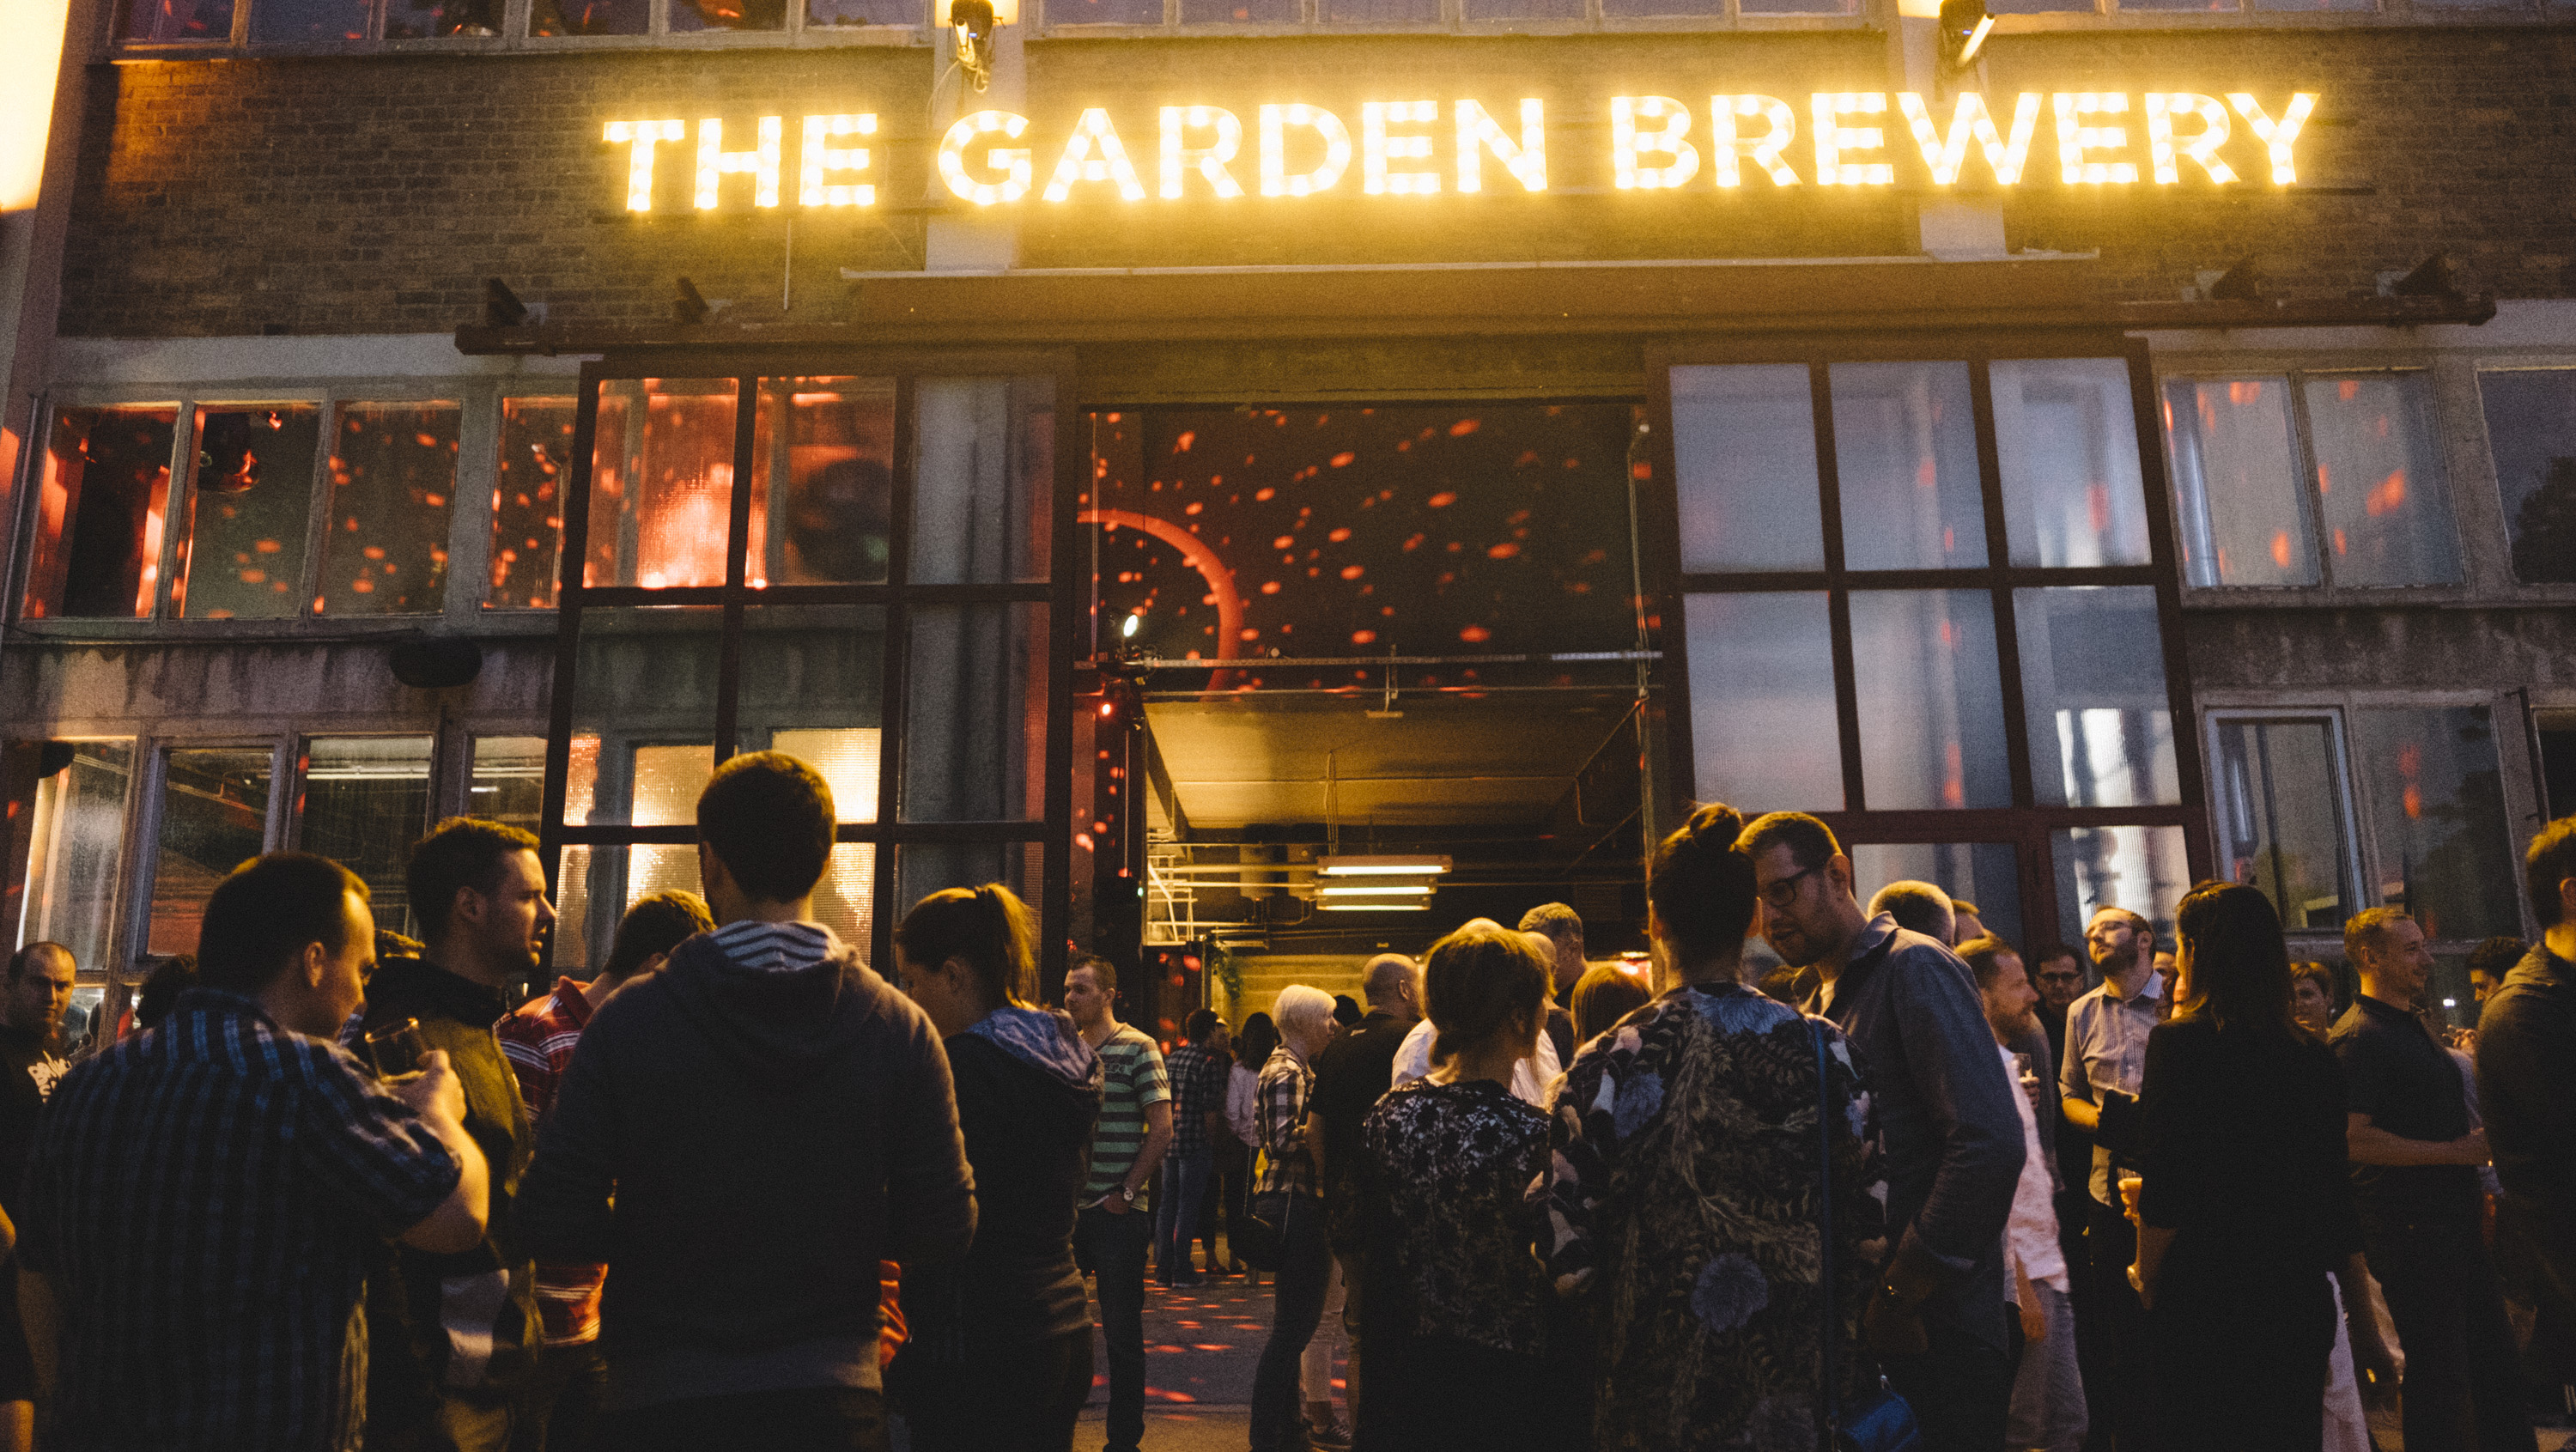 the-garden-brewery-entrance-by-domgoj-kunic